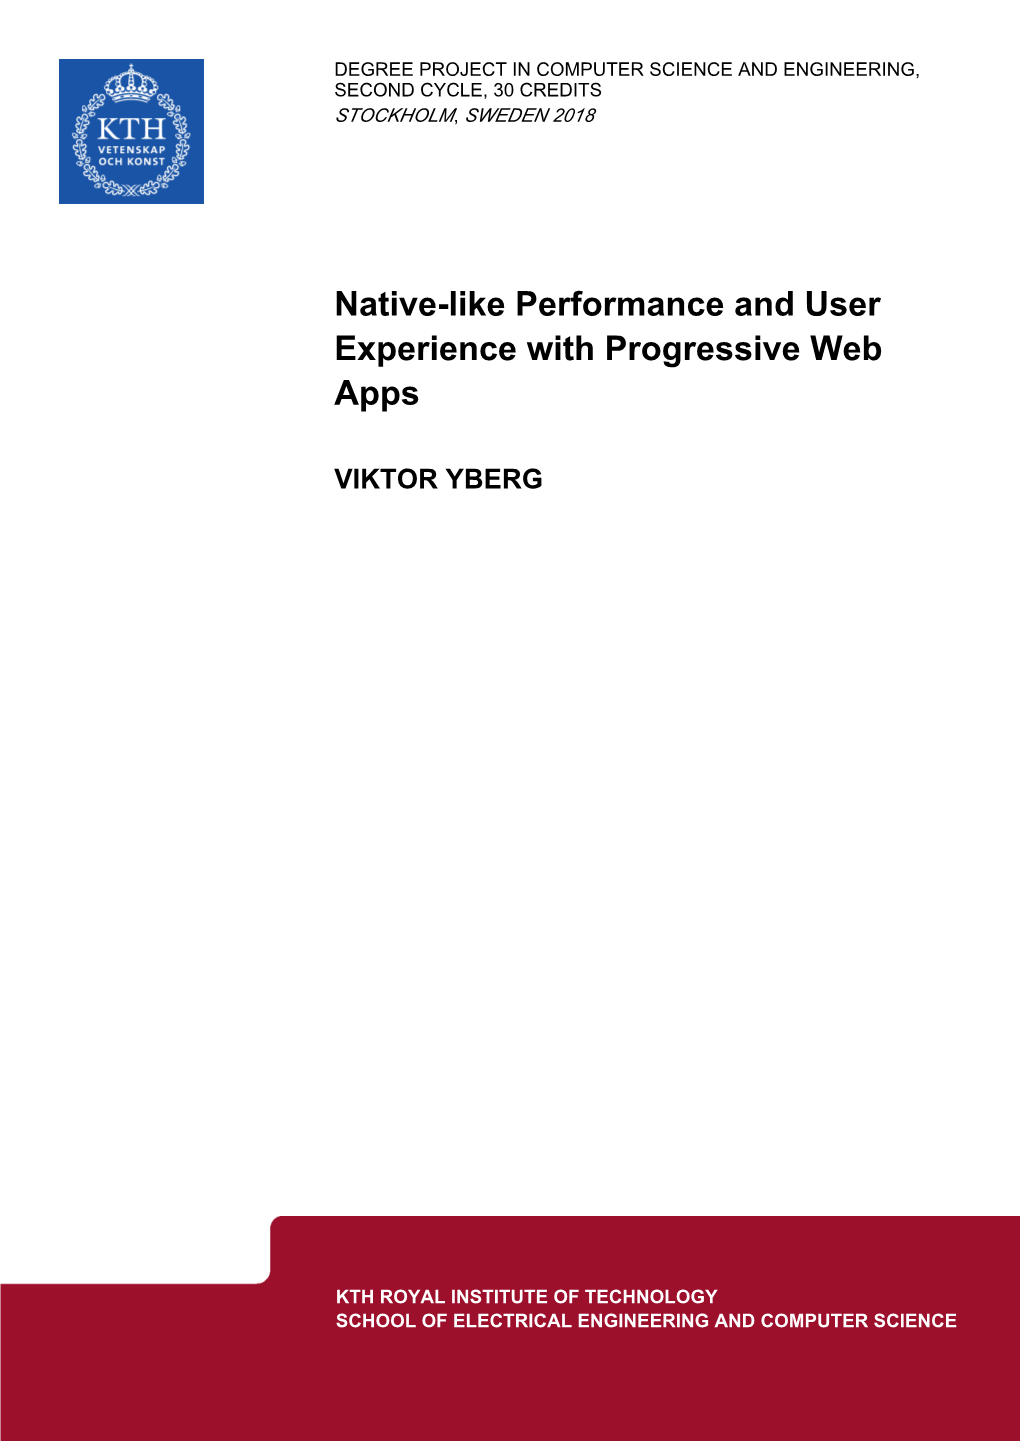 Native-Like Performance and User Experience with Progressive Web Apps